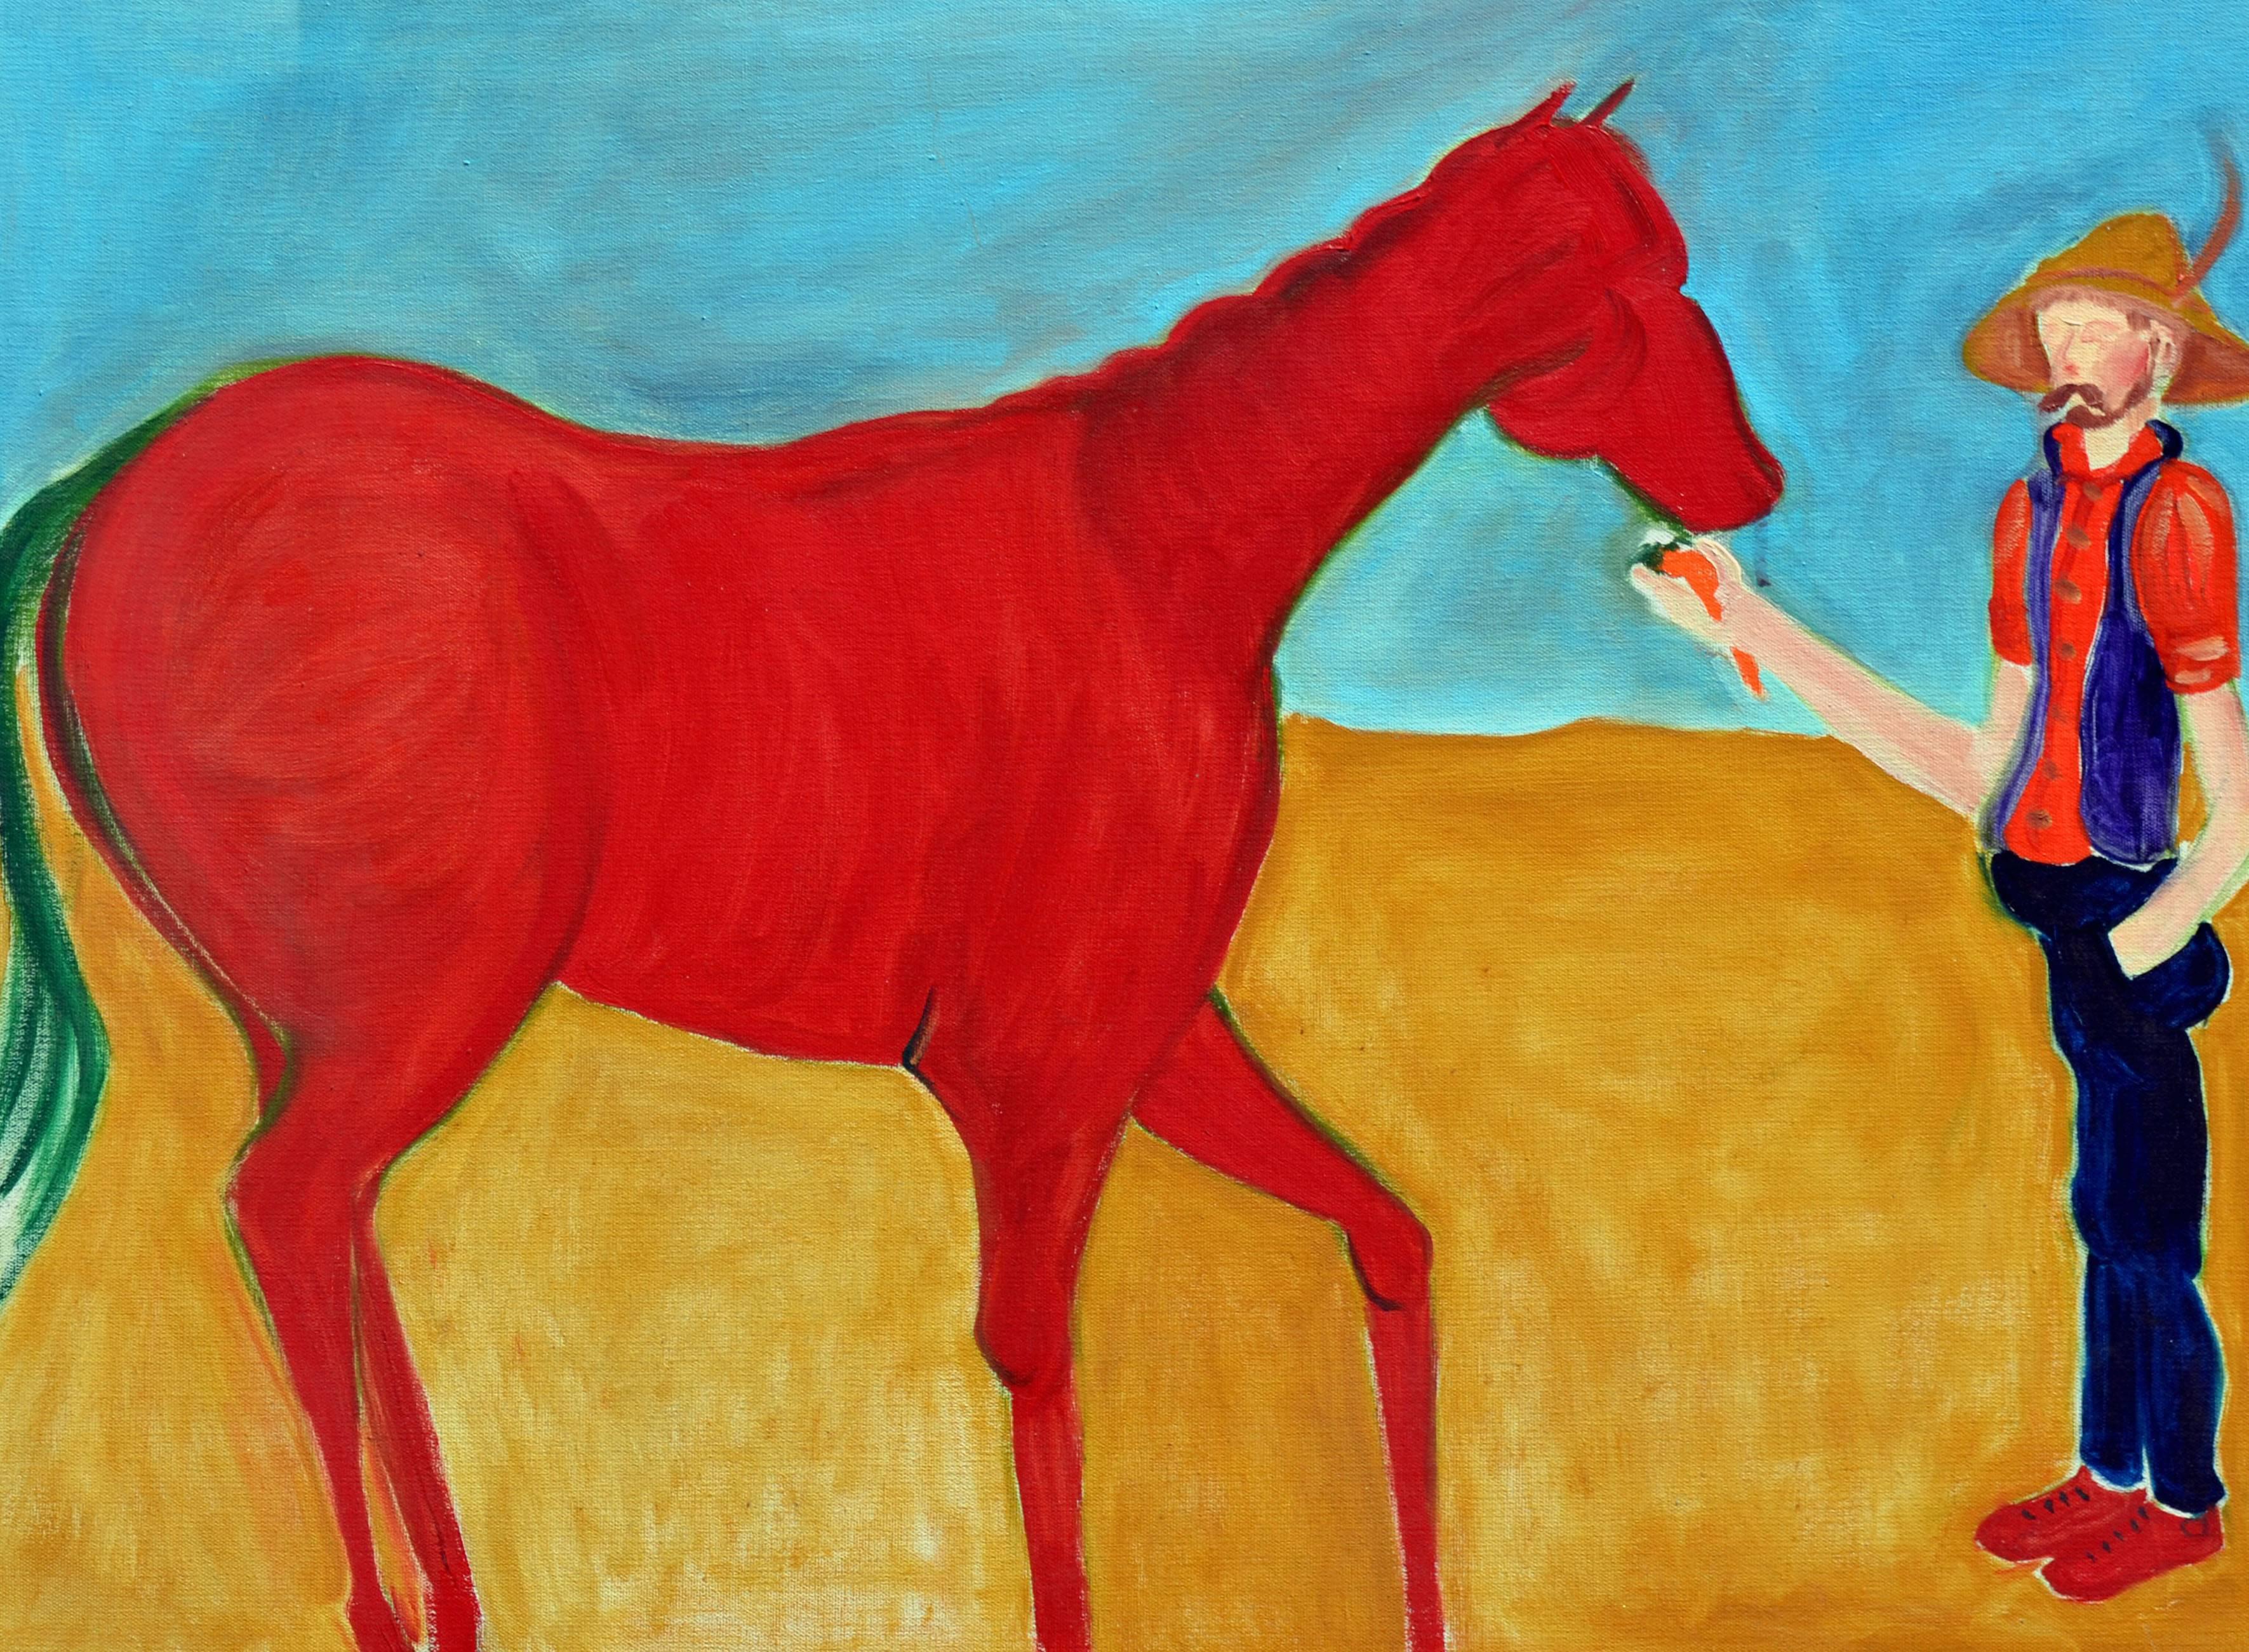 Red Horse & Cowboy by Molly Brubaker - Painting by Molly E. Brubaker